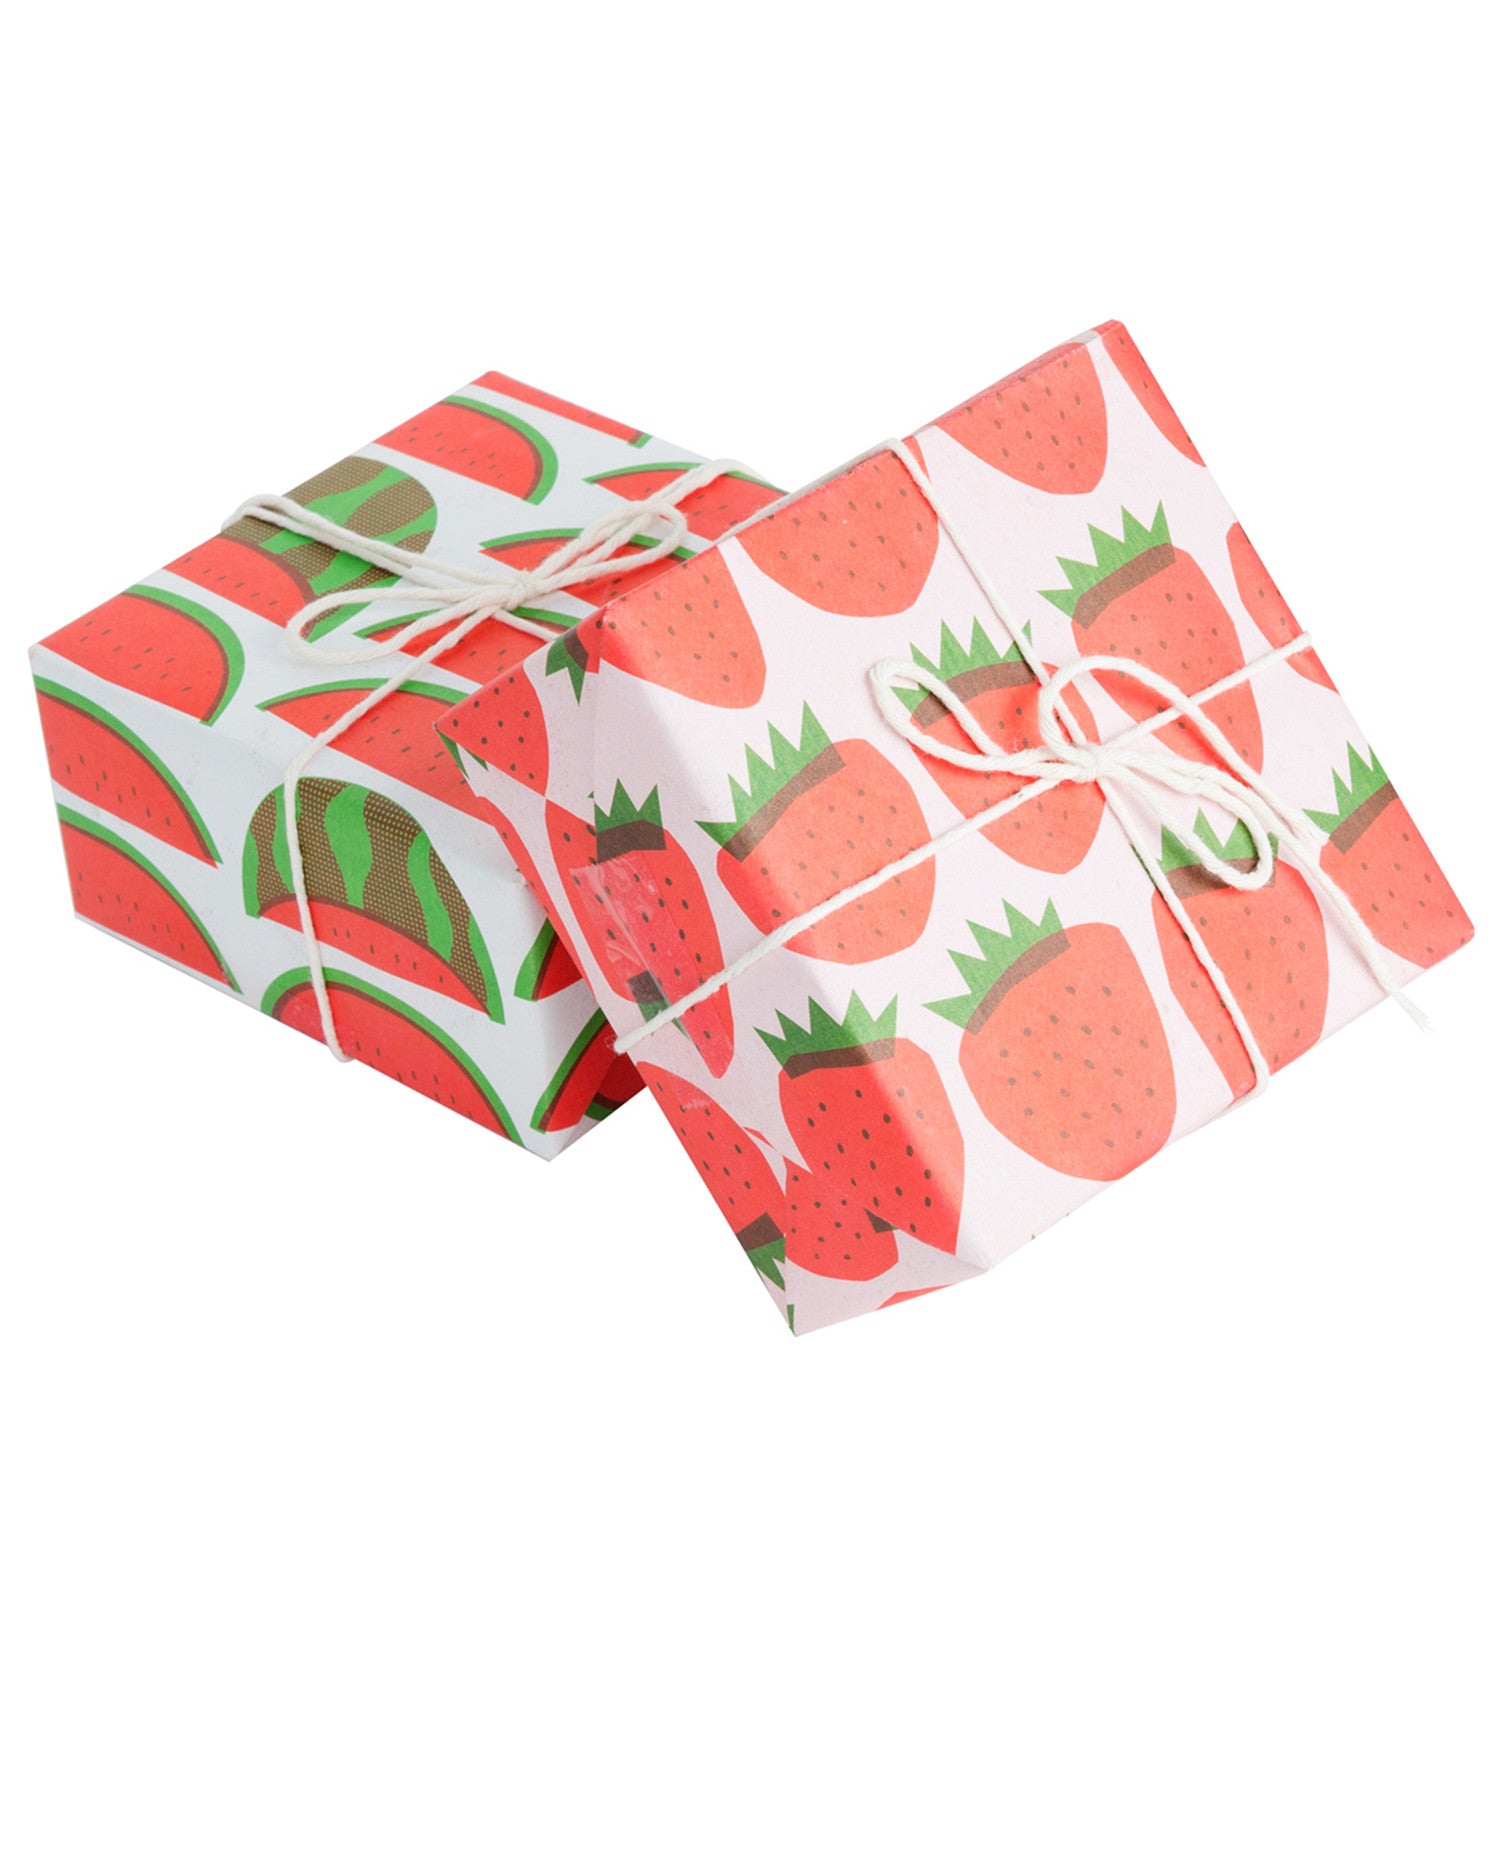 Elegant Casa Floral Printed Gift-Wrapping Paper Assorted Design, Size - 19